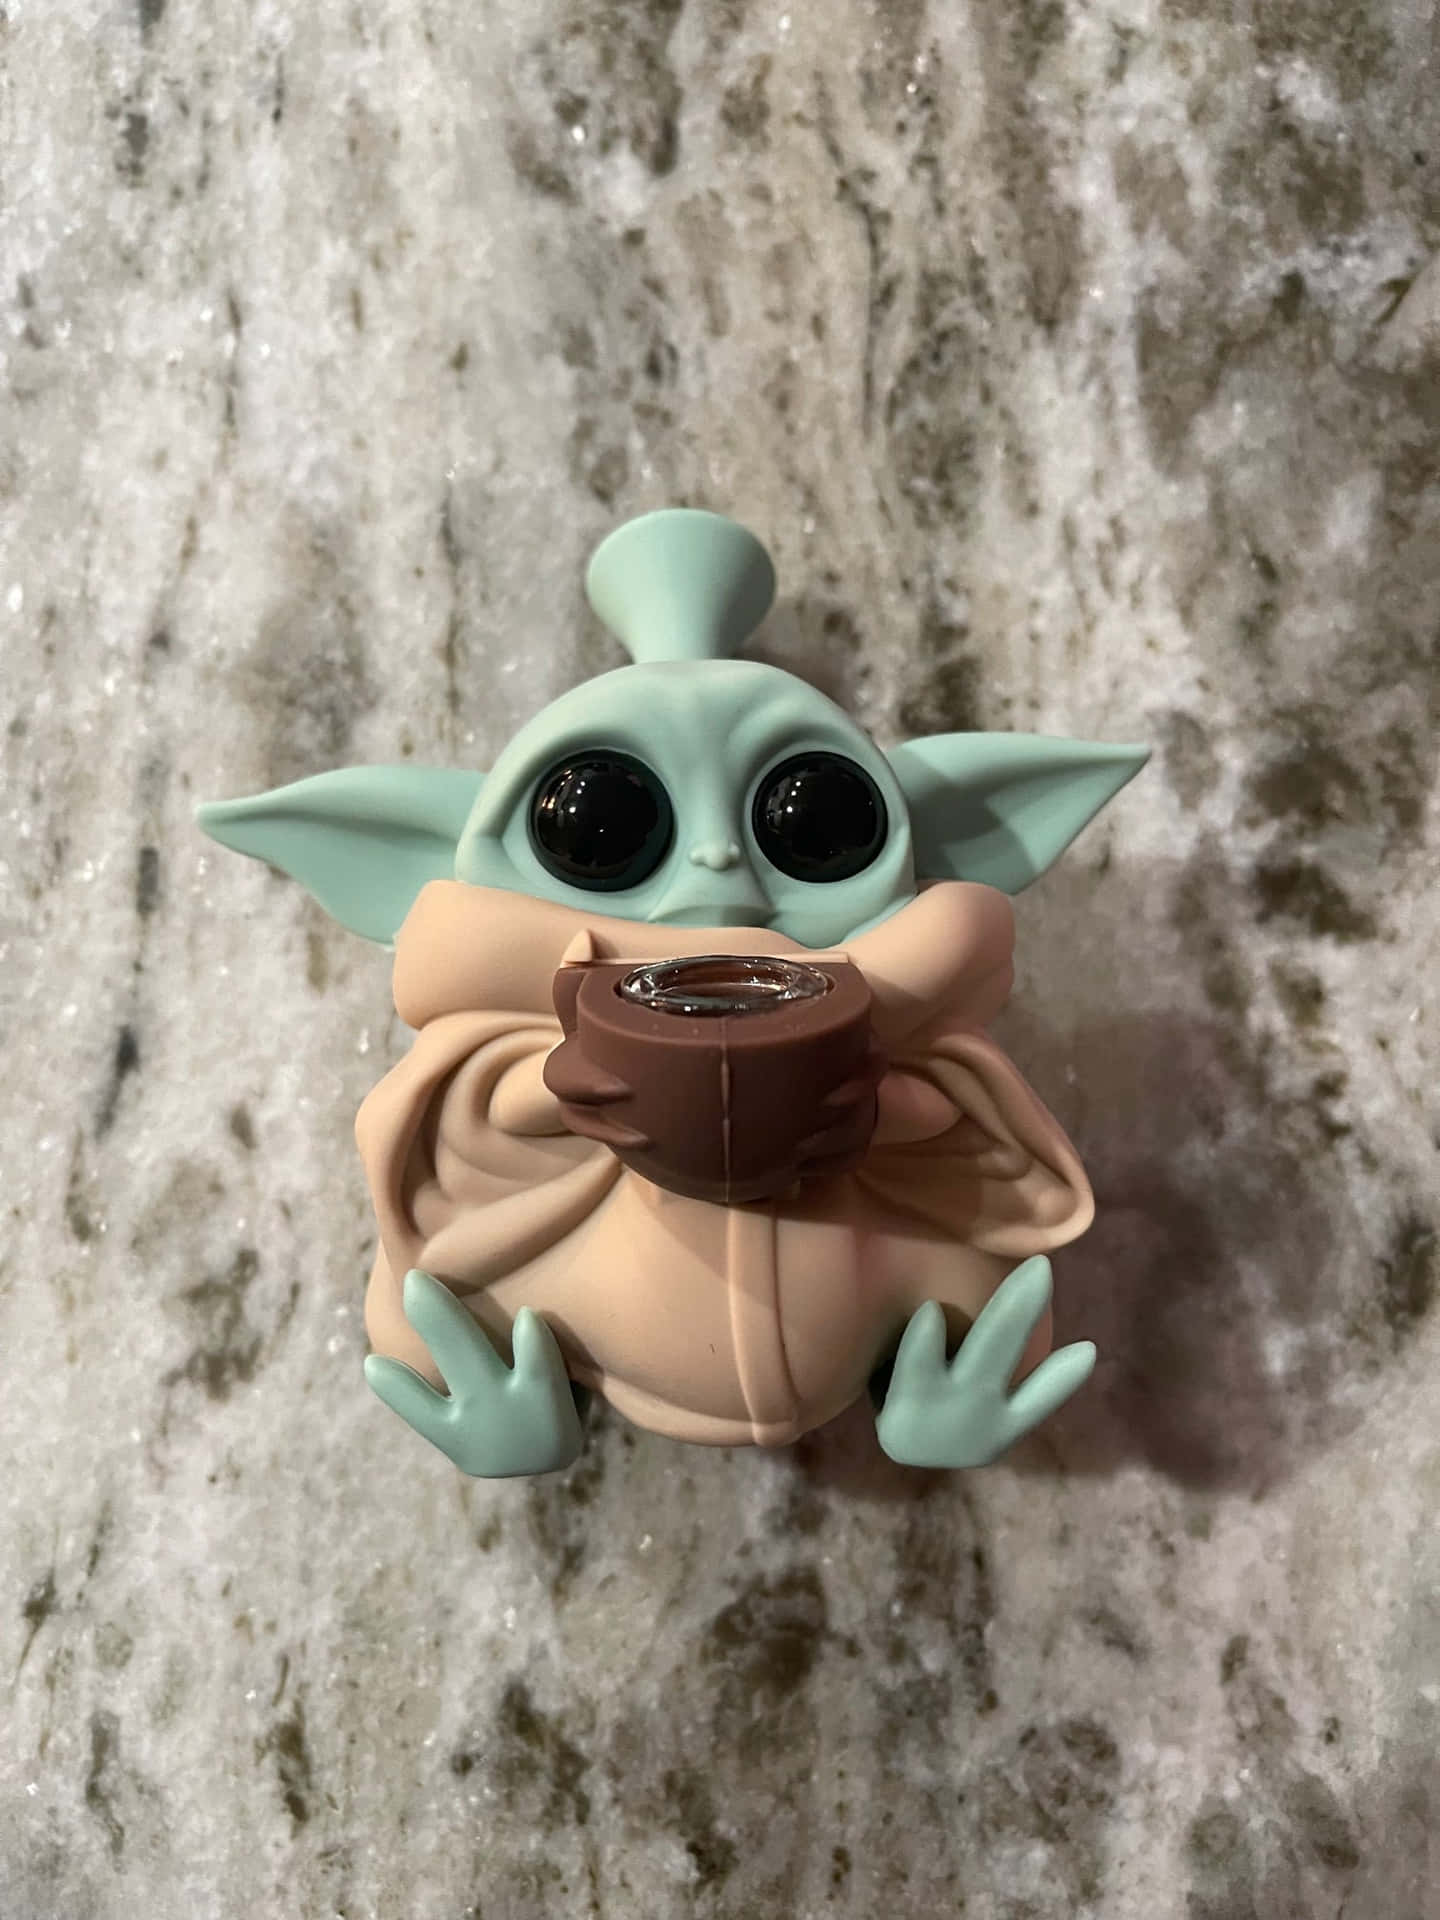 Baby Yoda looks cute in his new aesthetic! Wallpaper